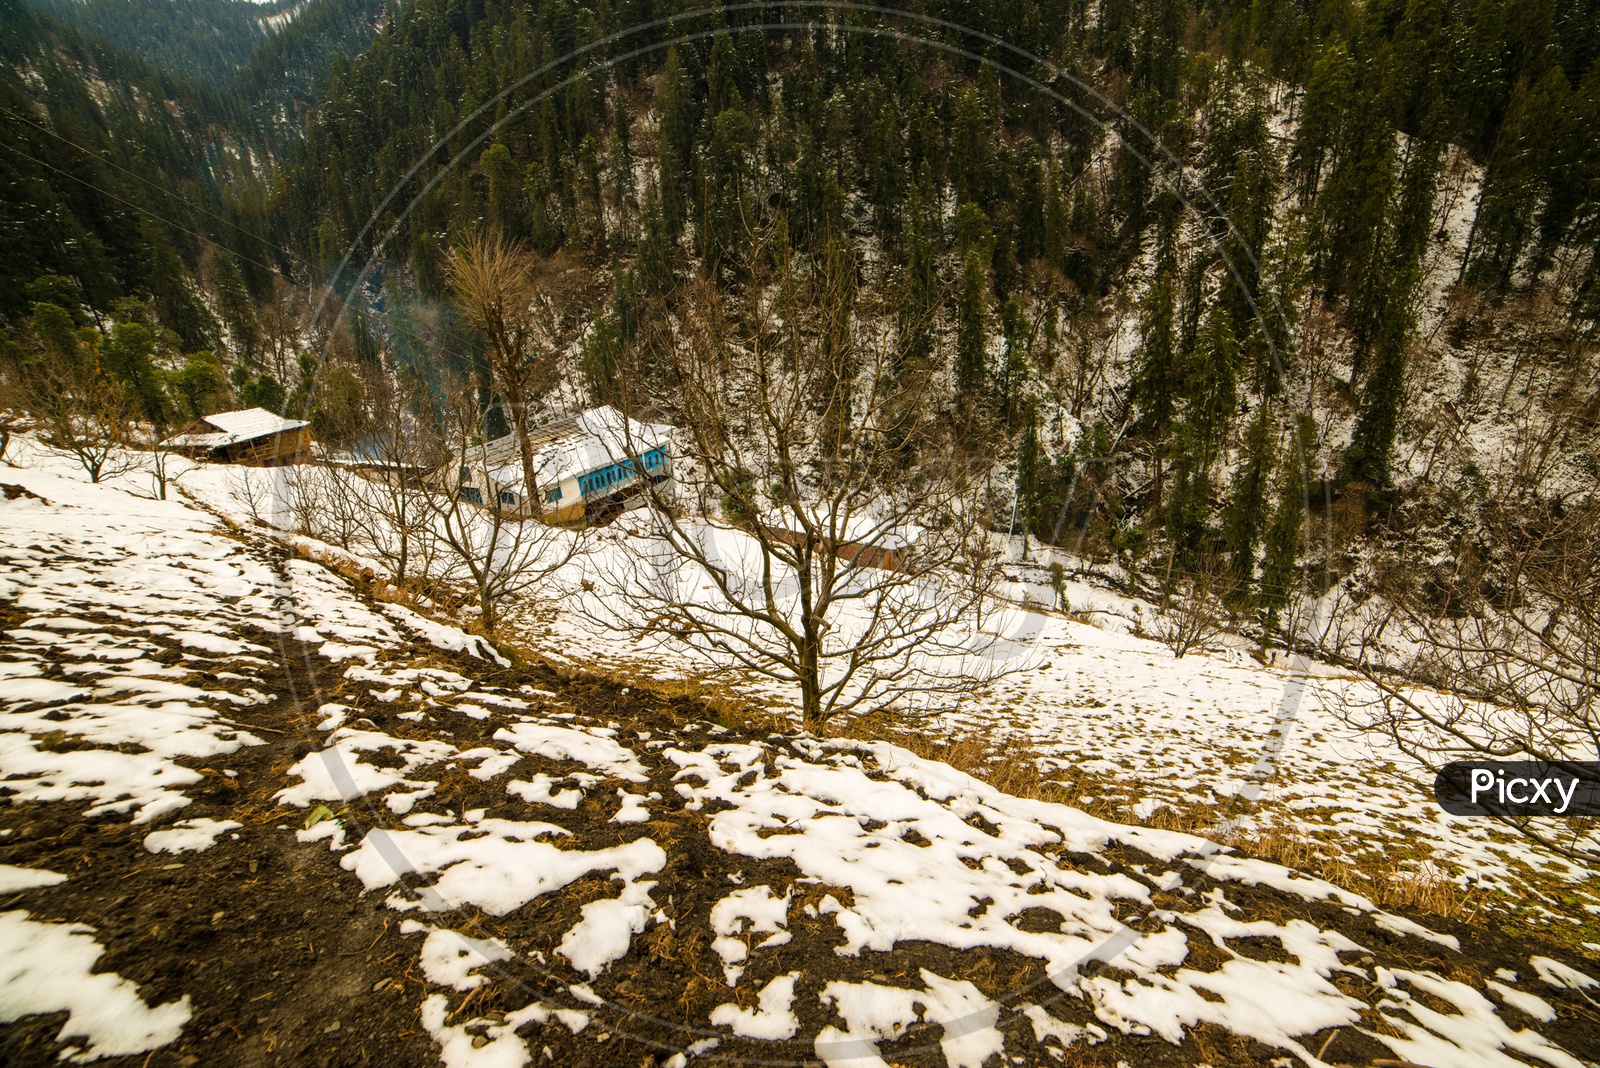 Houses Or Cottages In The Mountain Valleys Of Himalayas With Snow In Winter Season